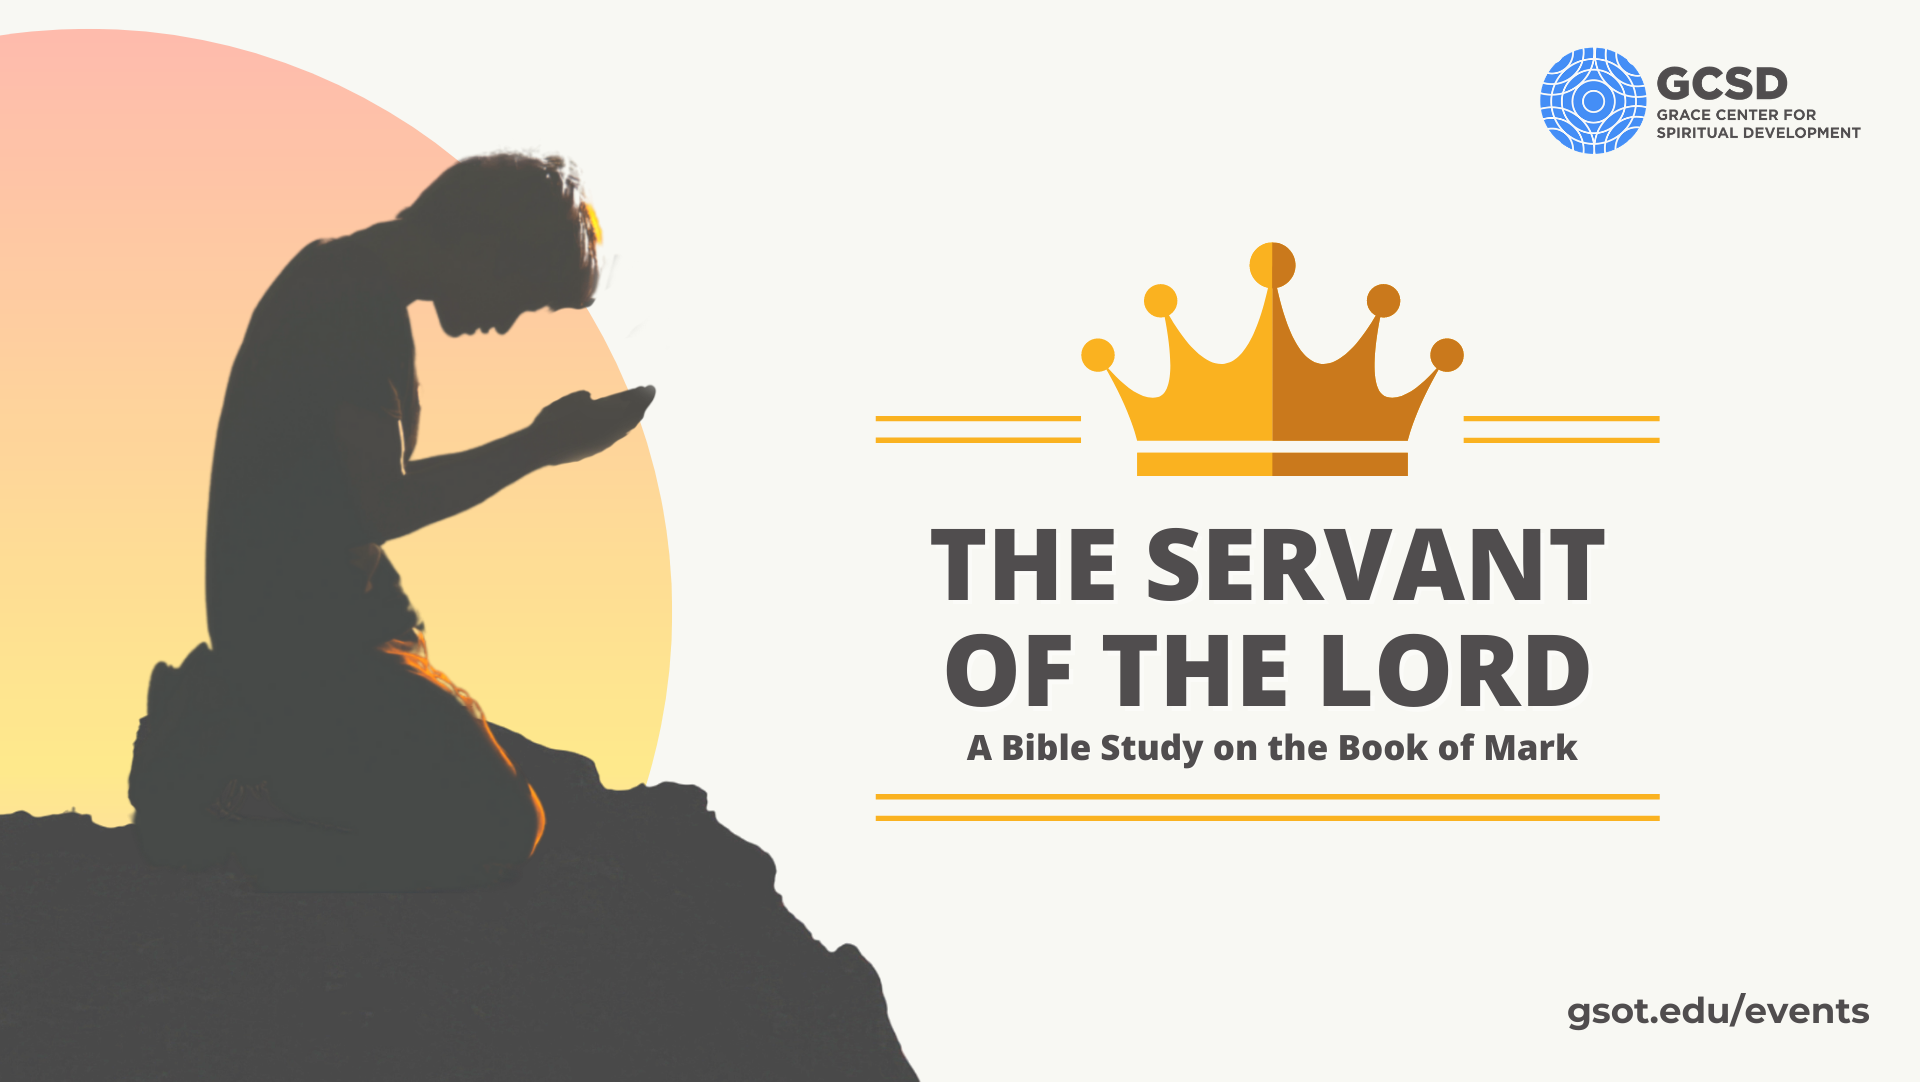 Final - Servant of the Lord FY21 Email _ 1920x1082 (1)